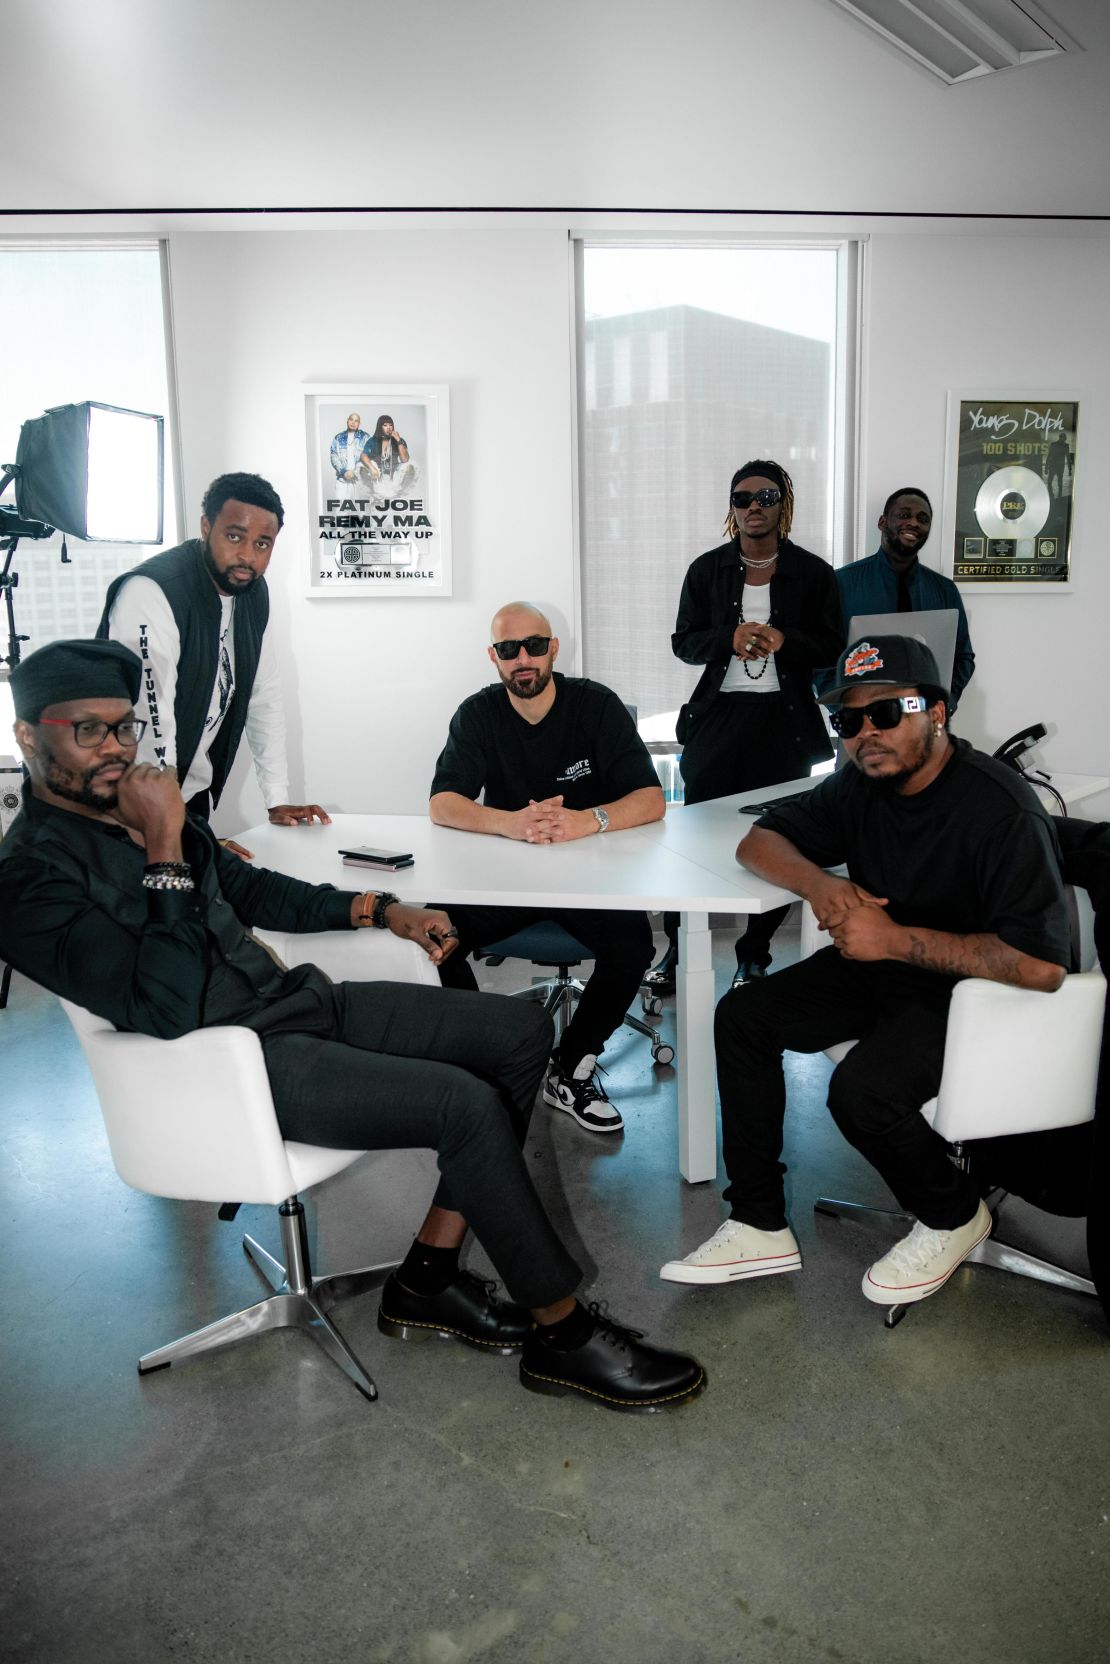 Nigerian recording artists Olamide (front, far right) and Fireboy DML (back, second fom right) with Empire CEO Ghazi Shami (center) and members of the YBNL/Empire team at Empire's headquarters in San Francisco.